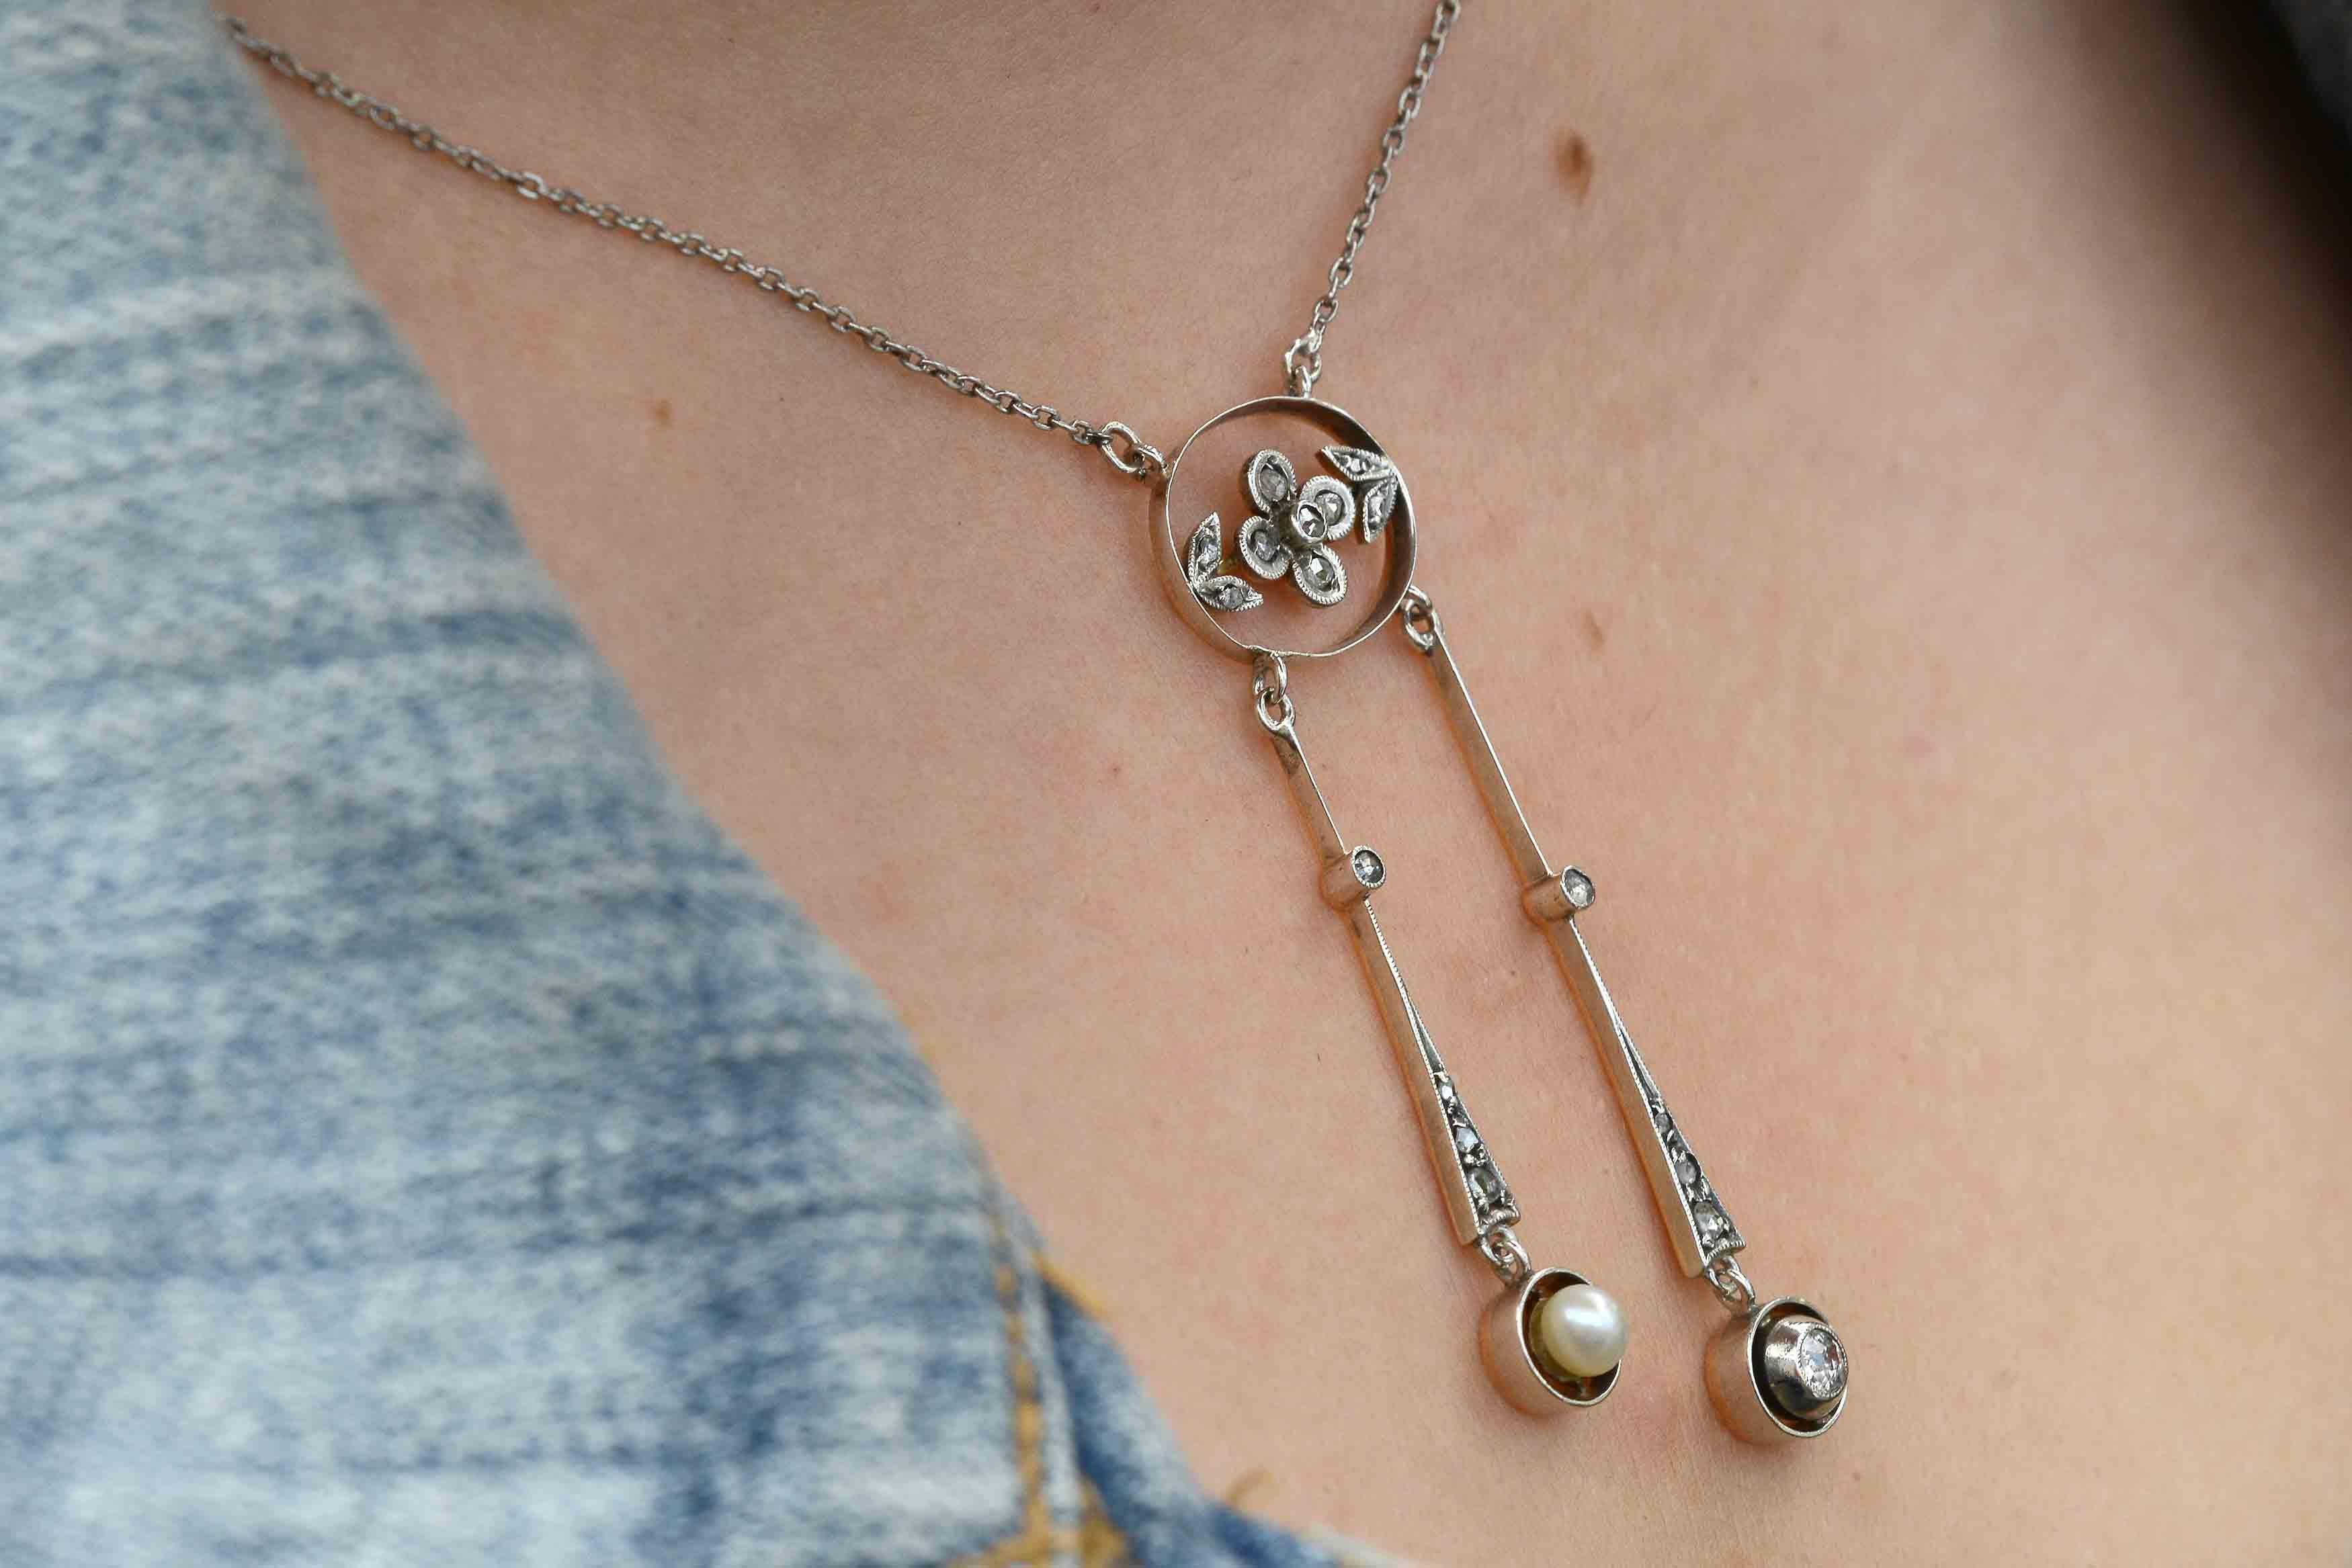 A swoon-worthy, Art Nouveau antique negligée drop necklace loaded with charm. You will love the floral garland center, two tone platinum and gold along with the asymmetrical lavalier of a natural pearl and diamond. 
An amazing wedding day accessory.